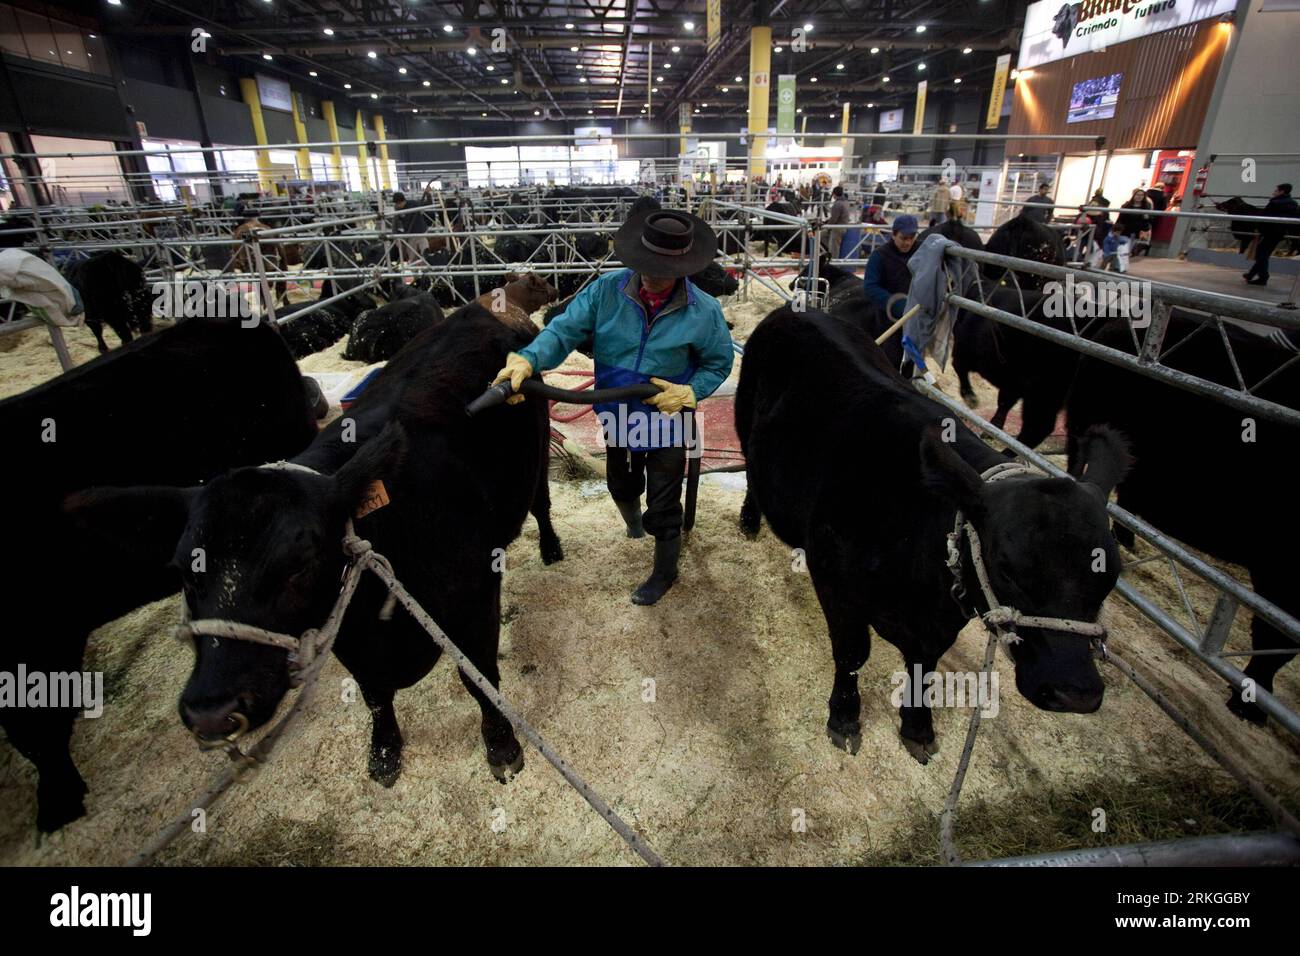 Bildnummer: 55594552  Datum: 14.07.2011  Copyright: imago/Xinhua (110715) -- BUENOS AIRES, July 15, 2011 (Xinhua) -- A staff takes care of the cattles during the first day of the 125th La Rural Expo, the most important cattle and farming expo in Argentina, in Buenos Aires, Argentina, July 14, 2011. (Xinhua/Martin Zabala) (xhn) ARGENTINA-BUENOS AIRES-LA RURAL PUBLICATIONxNOTxINxCHN Gesellschaft Wirtschaft Landwirtschaft Messe Landwirtschaftsmesse xjh 2011 quer  o0 Tiere Rind Kalb Kälber    Bildnummer 55594552 Date 14 07 2011 Copyright Imago XINHUA 110 715 Buenos Aires July 15 2011 XINHUA a Staf Stock Photo